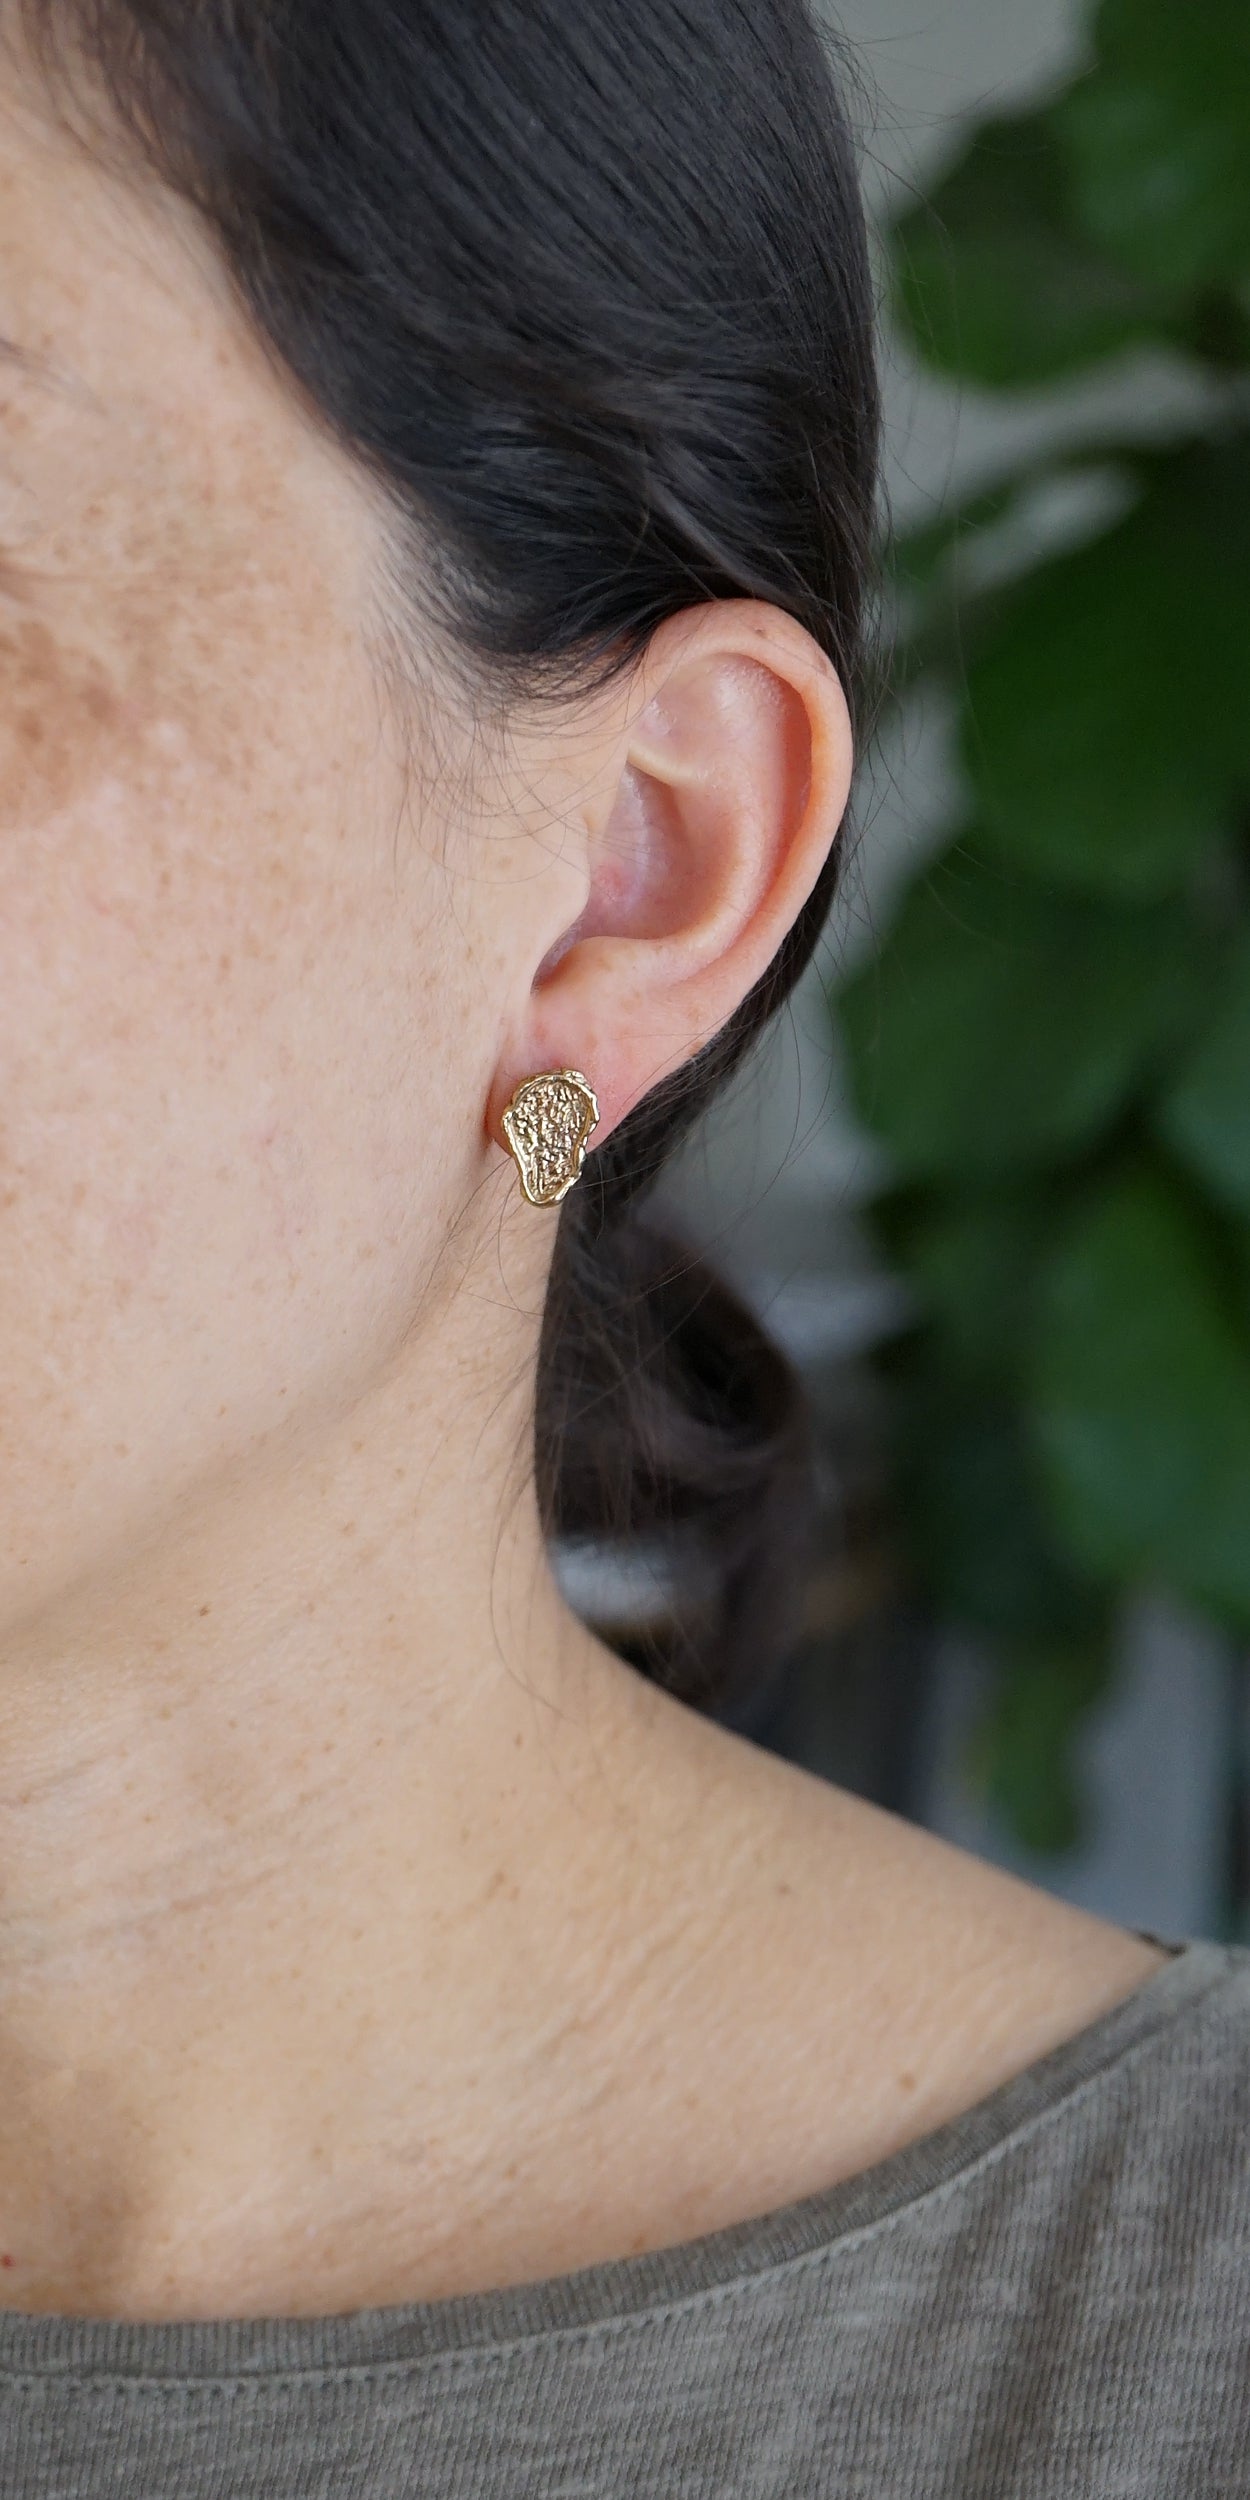 Textured Nugget Studs-gold